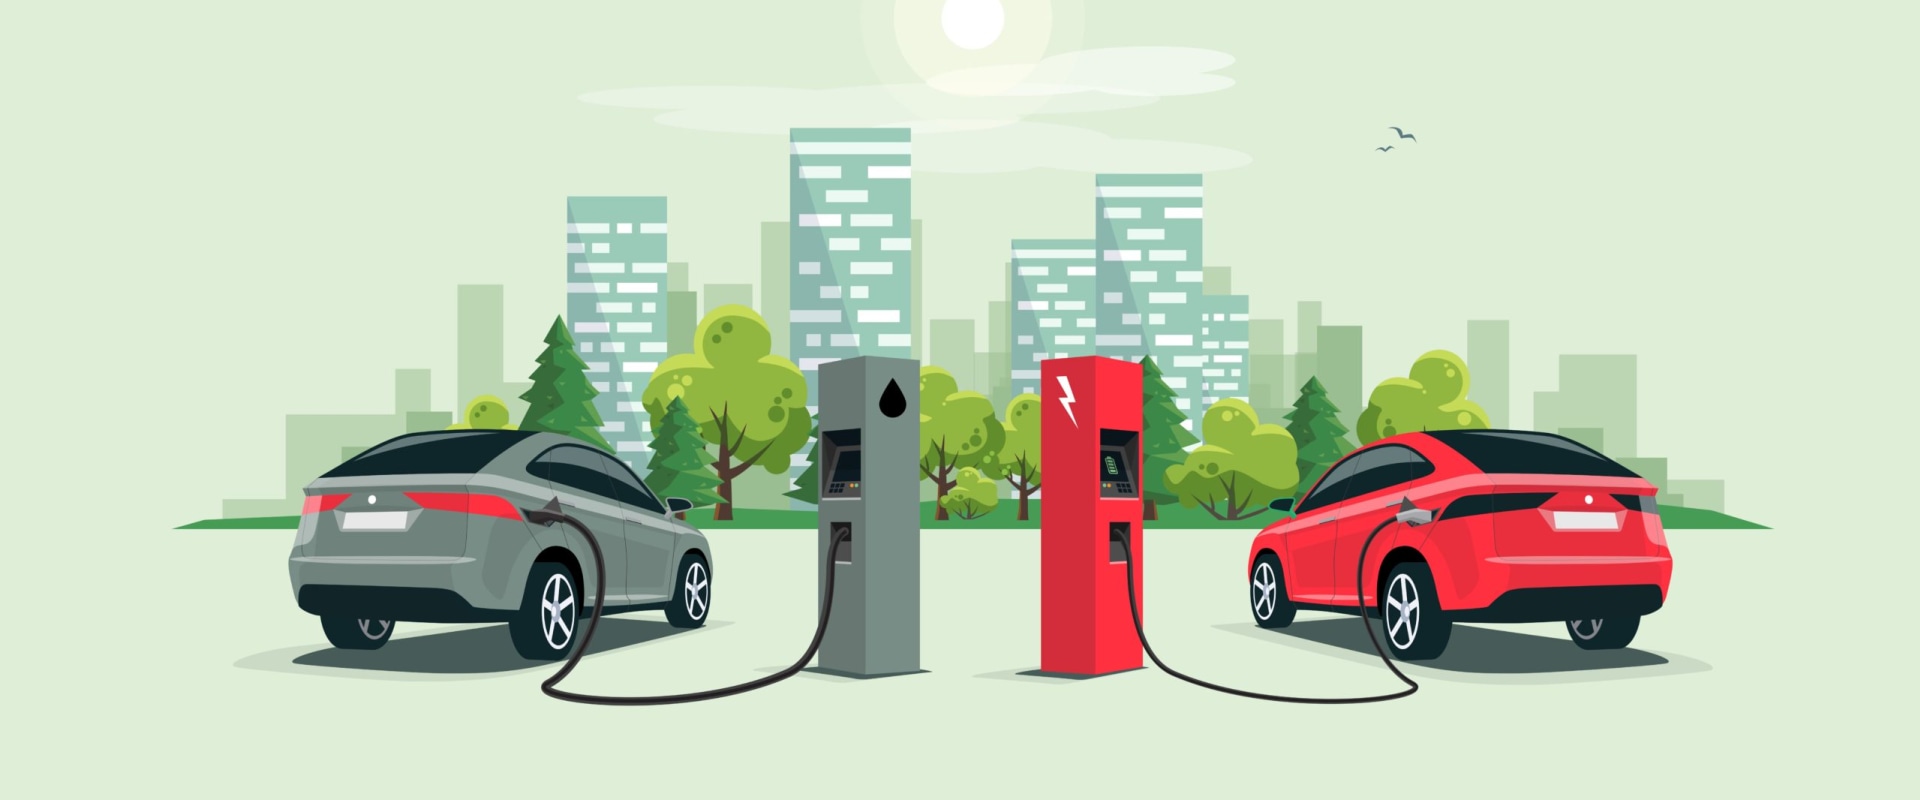 Are Electric Vehicles More Efficient than Gasoline Cars?